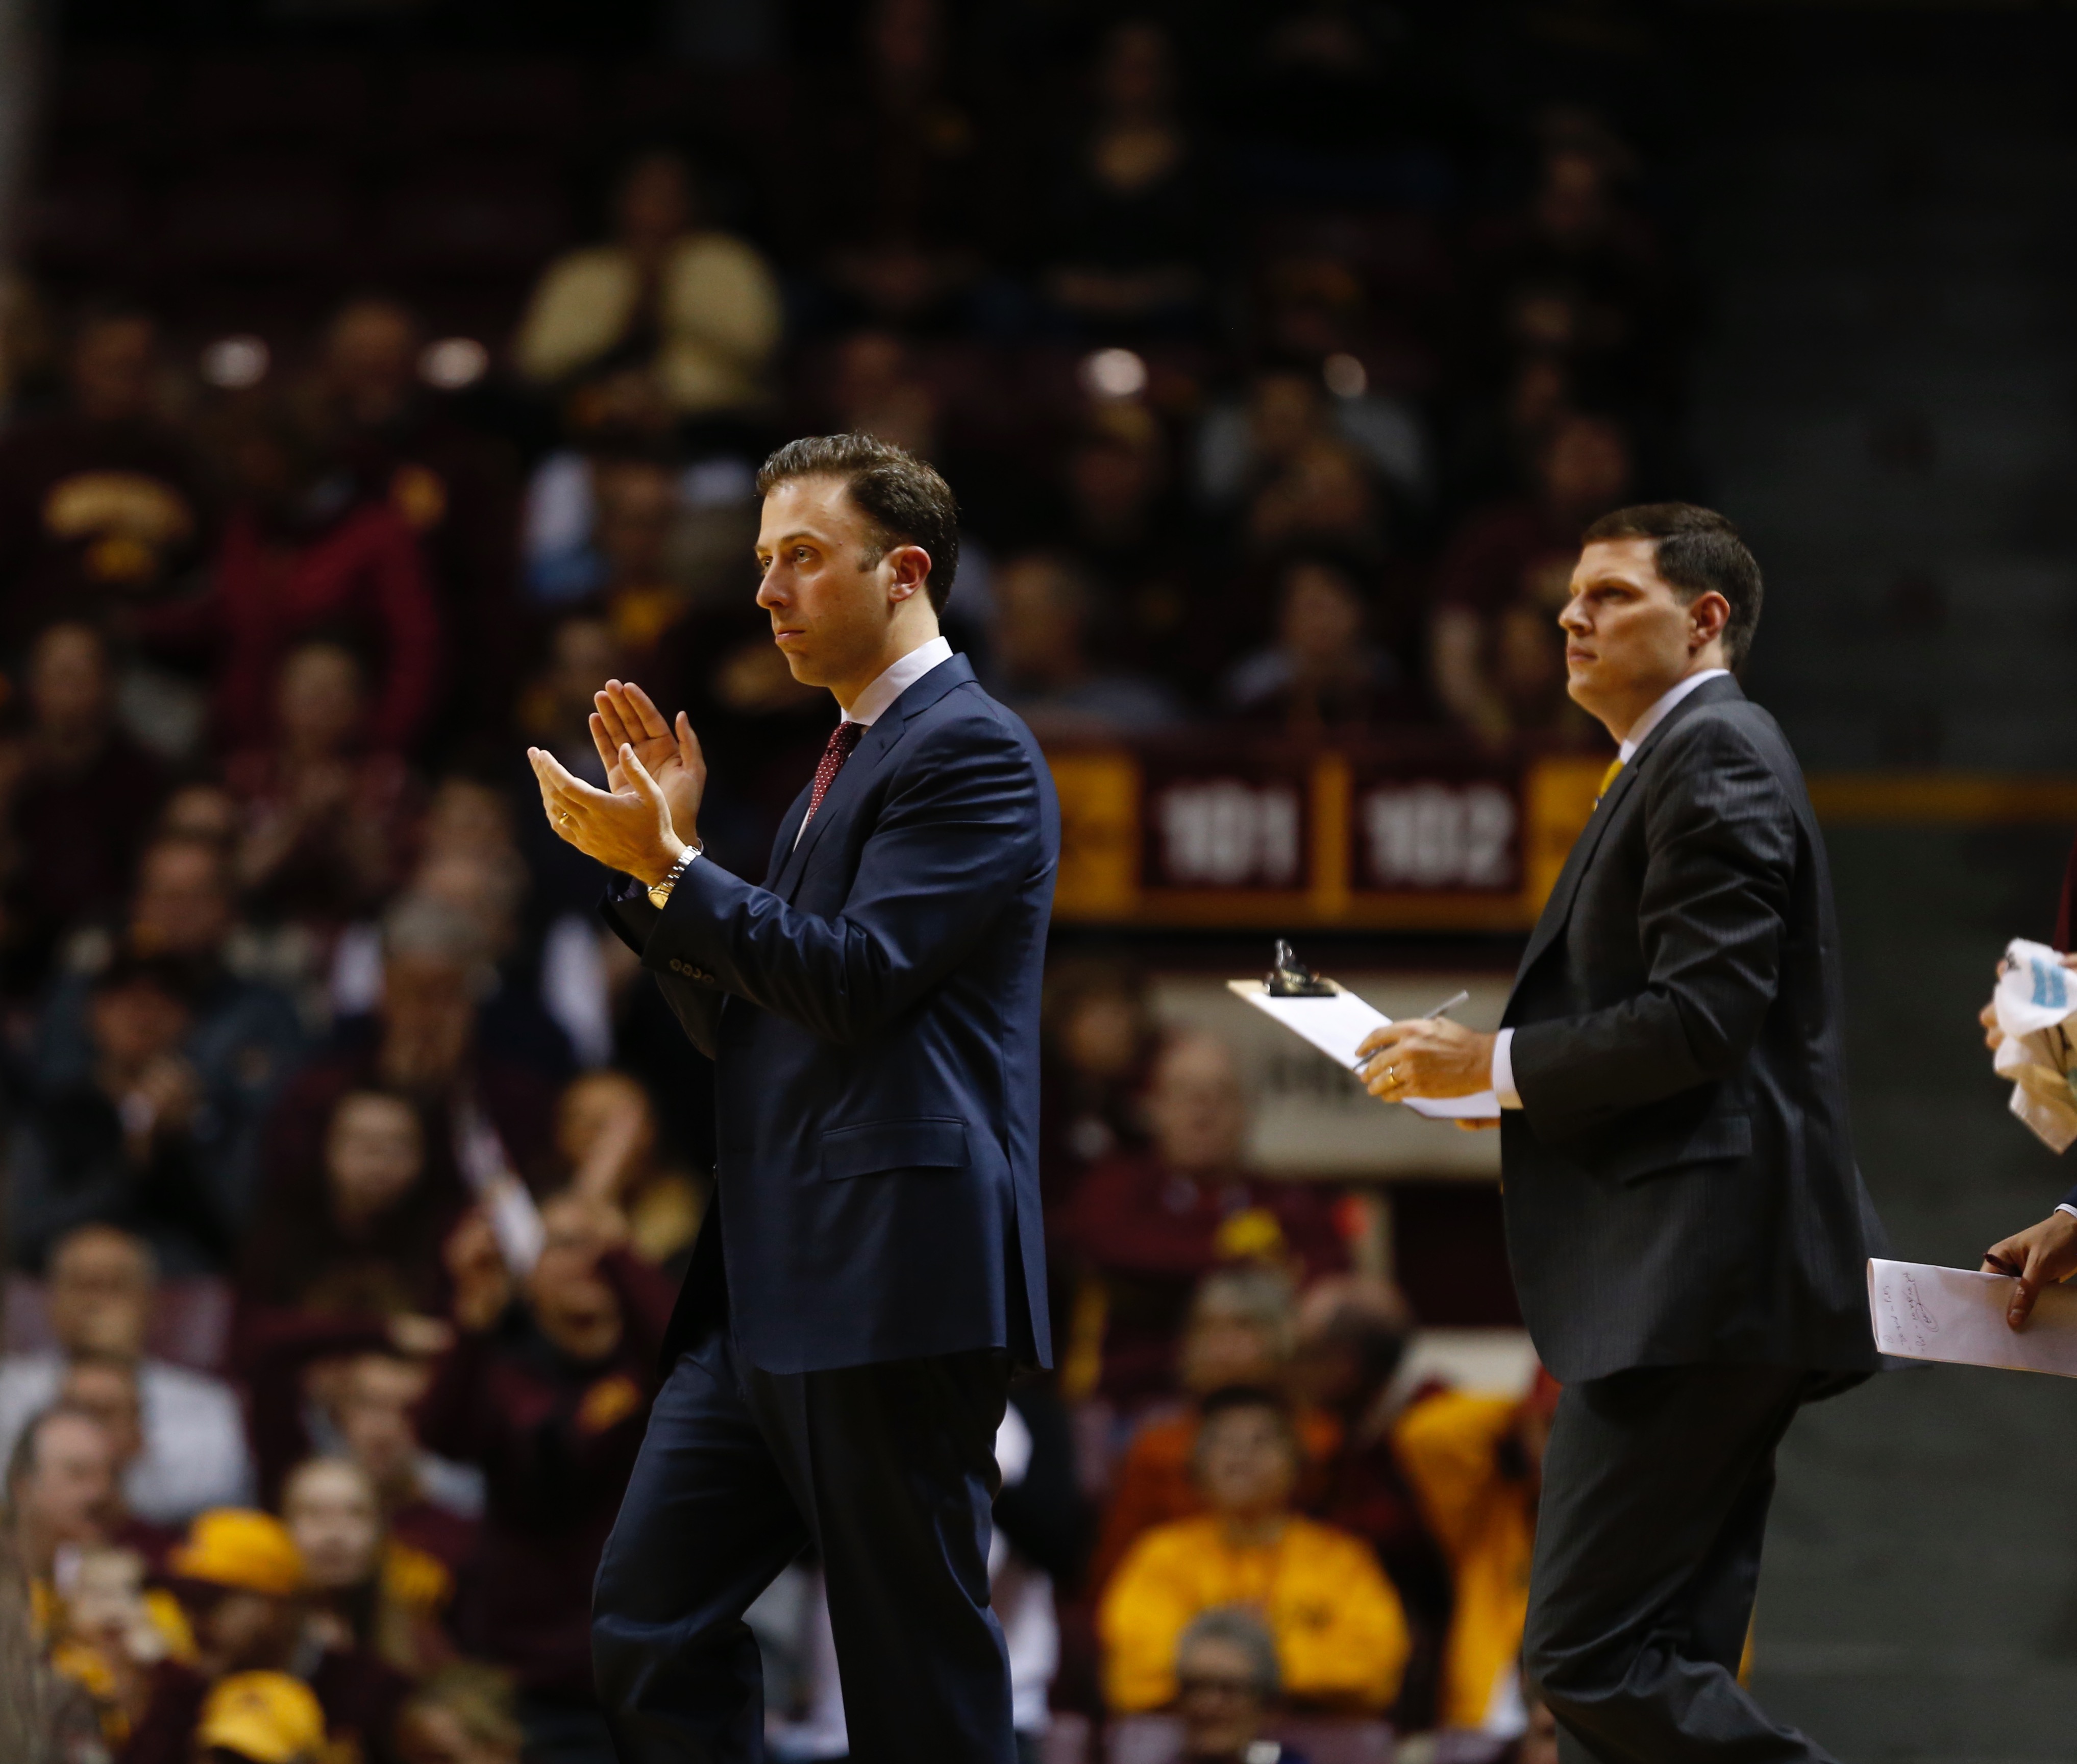 A DAY IN THE “OFF” SEASON by Richard Pitino